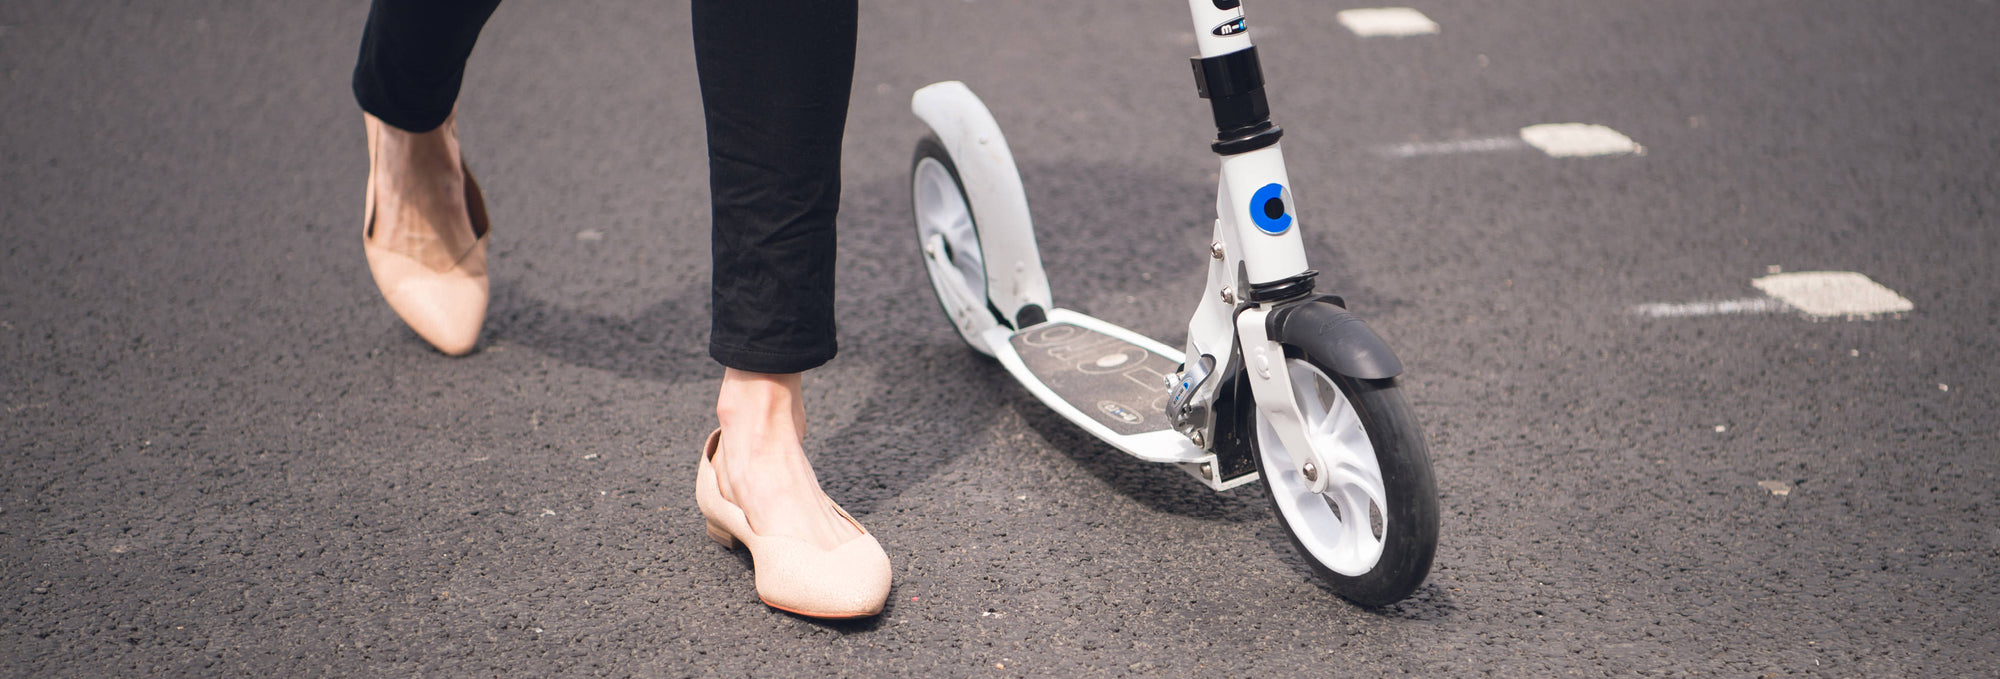 The insiders guide: how scooting short journeys can improve your health